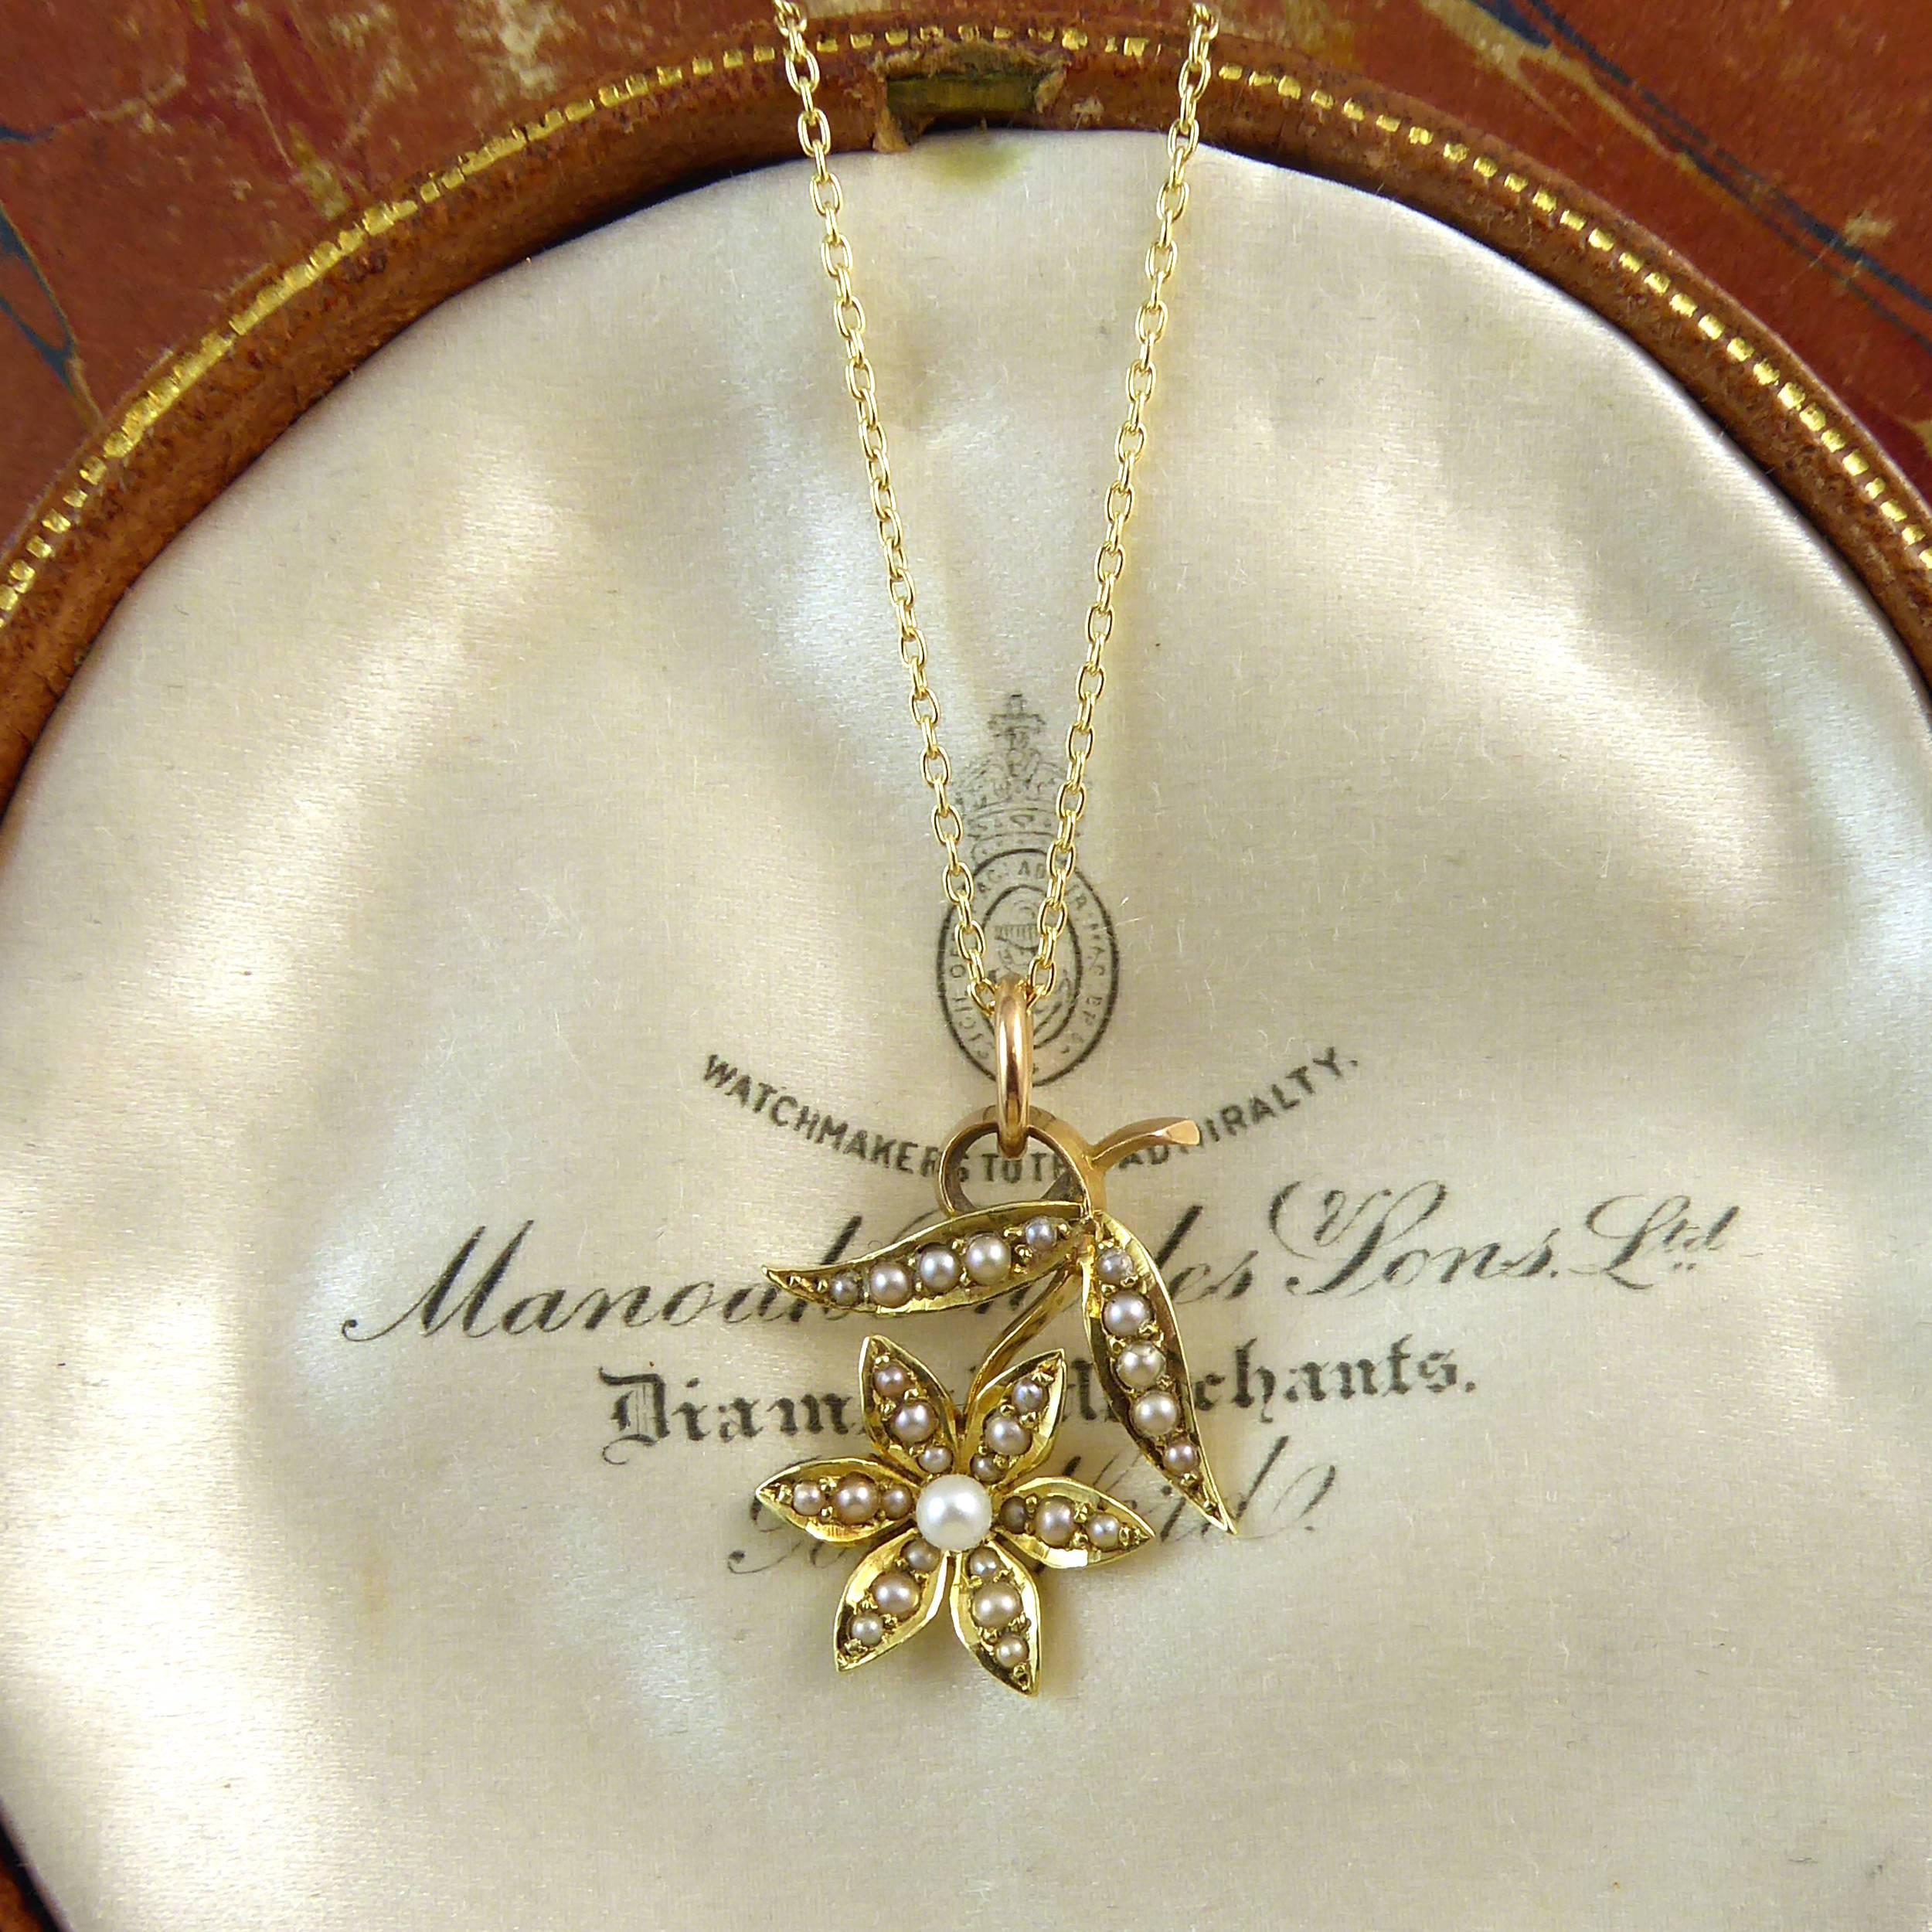 Delightful Victorian pearl pendant created in 15ct gold of a flower and leaf design all set with lustrous creamy white pearls.  The pendant is dainty and feminine and would be perfect to be worn on many occasions throught life and an ideal gift for